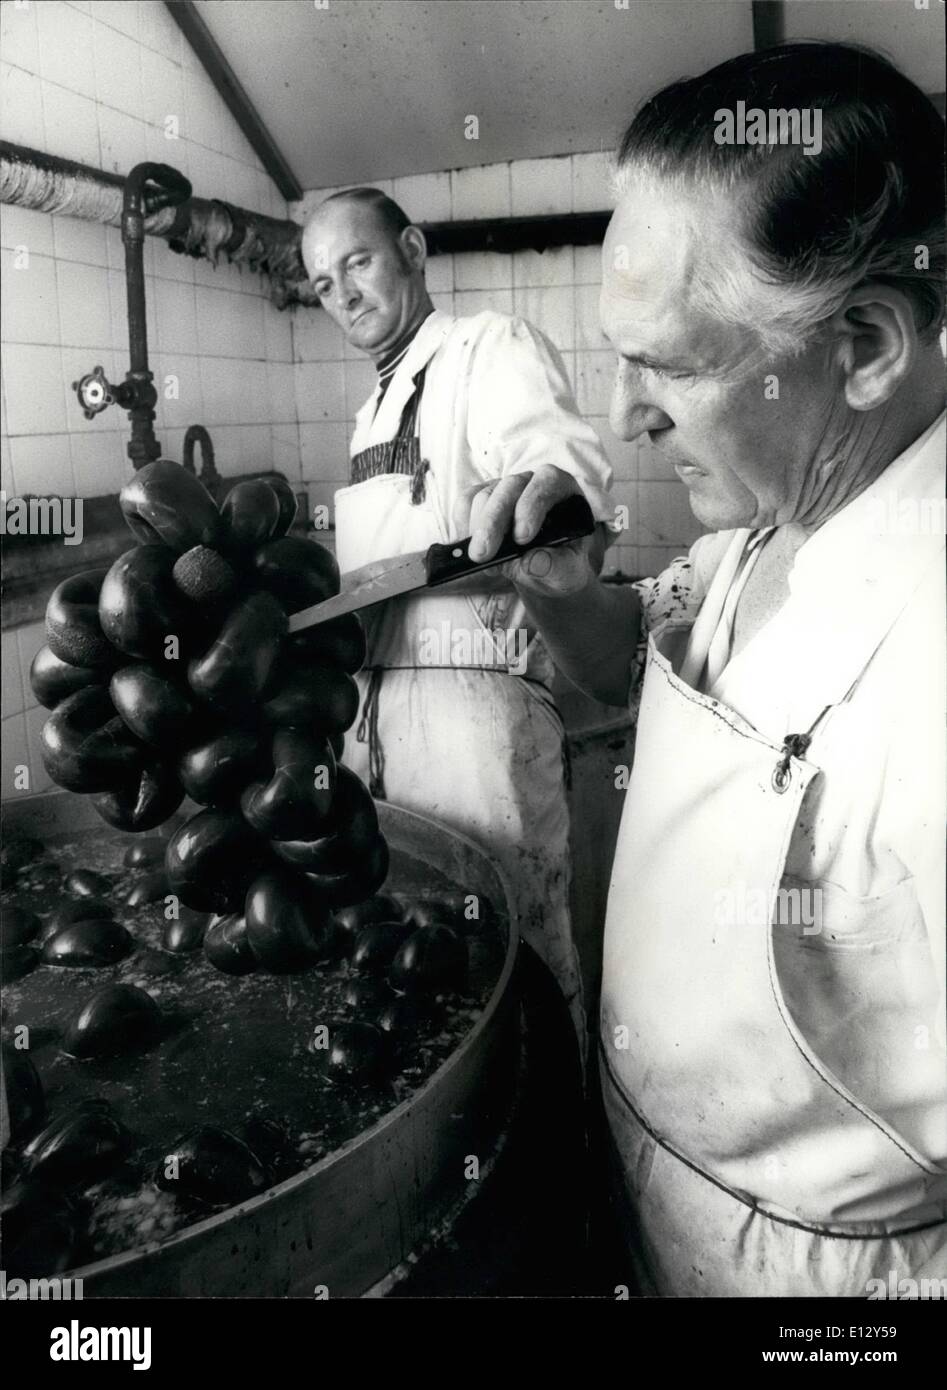 Feb. 25, 2012 - Walter Marekey right who has made over 2000 tons of black pudding since he left school at the age of 12, works Stock Photo